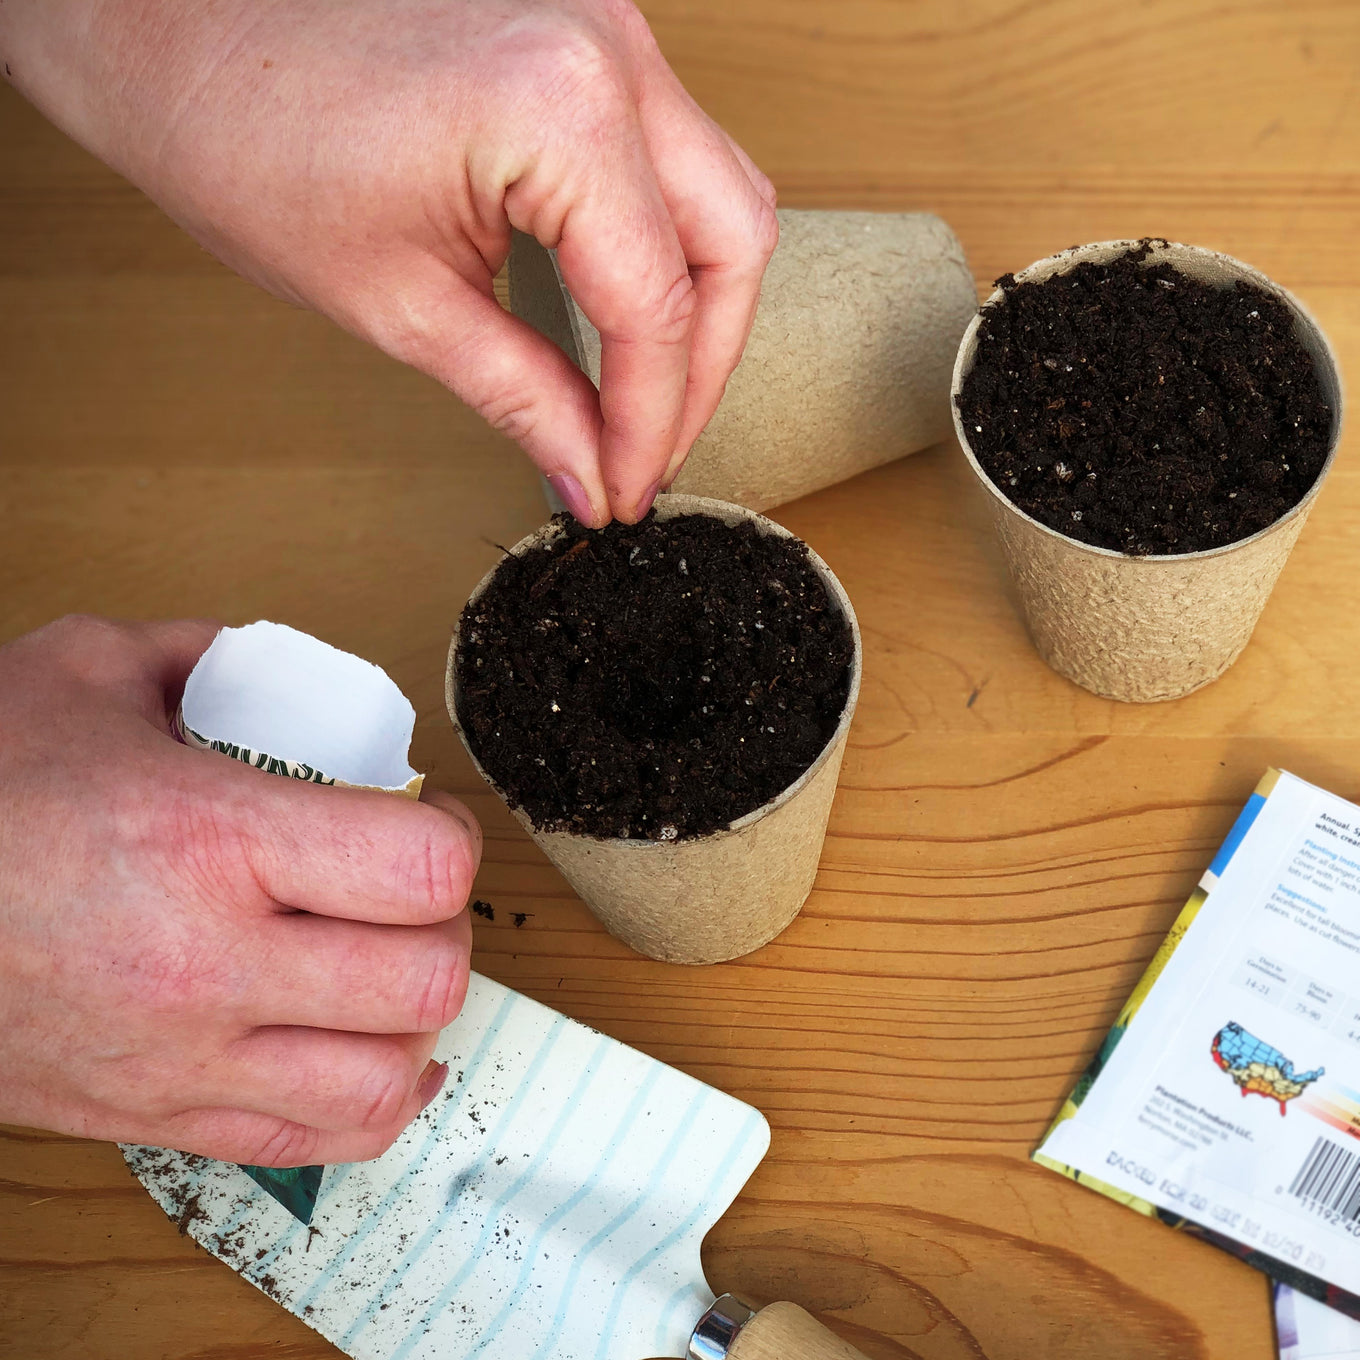 Start your White Evening Glory Flower Moonflower seeds in biodegradable peat and paper pots.